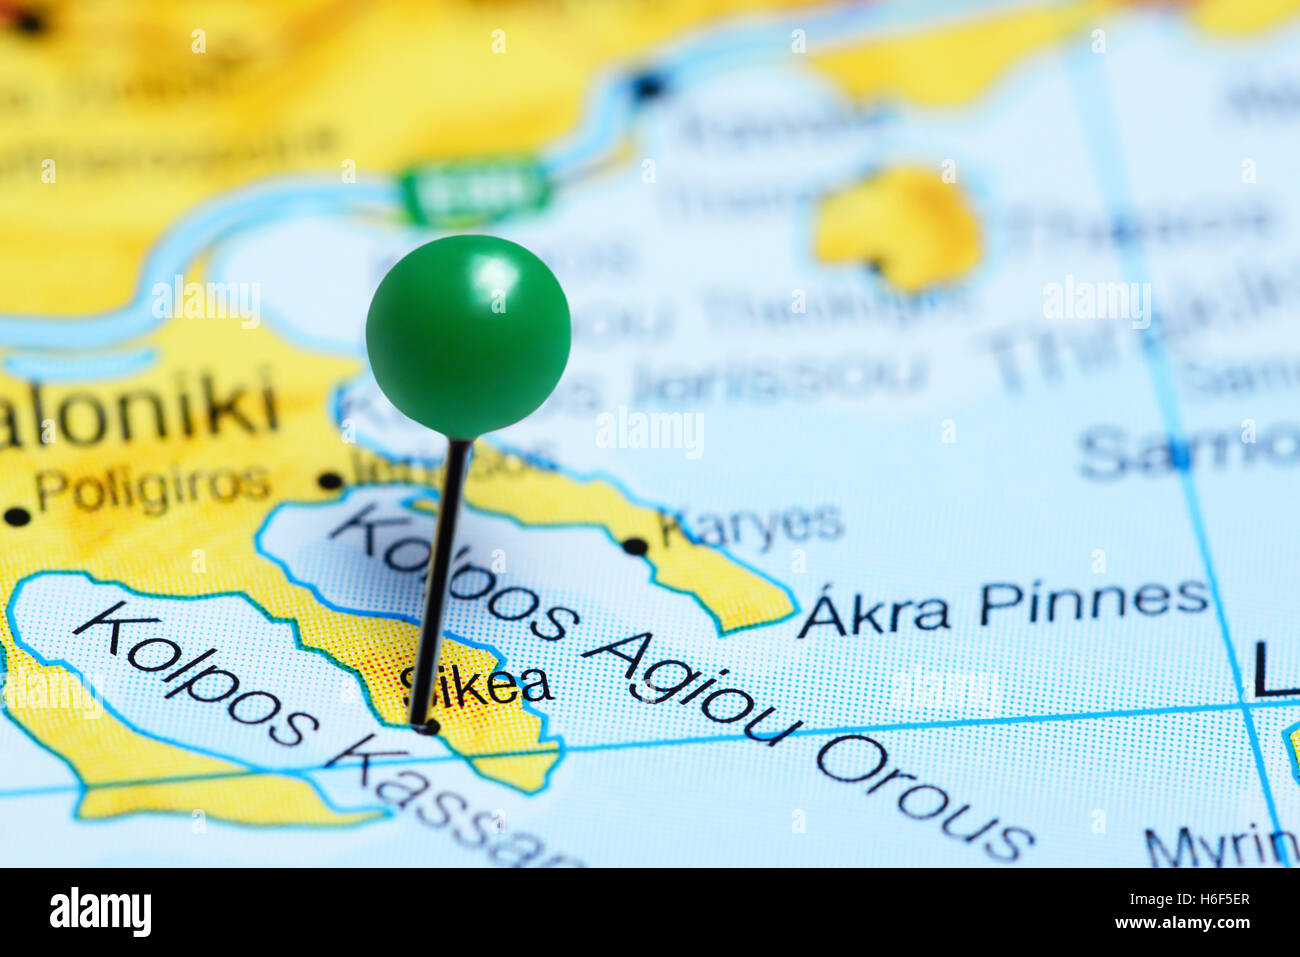 Sikea pinned on a map of Greece Stock Photo